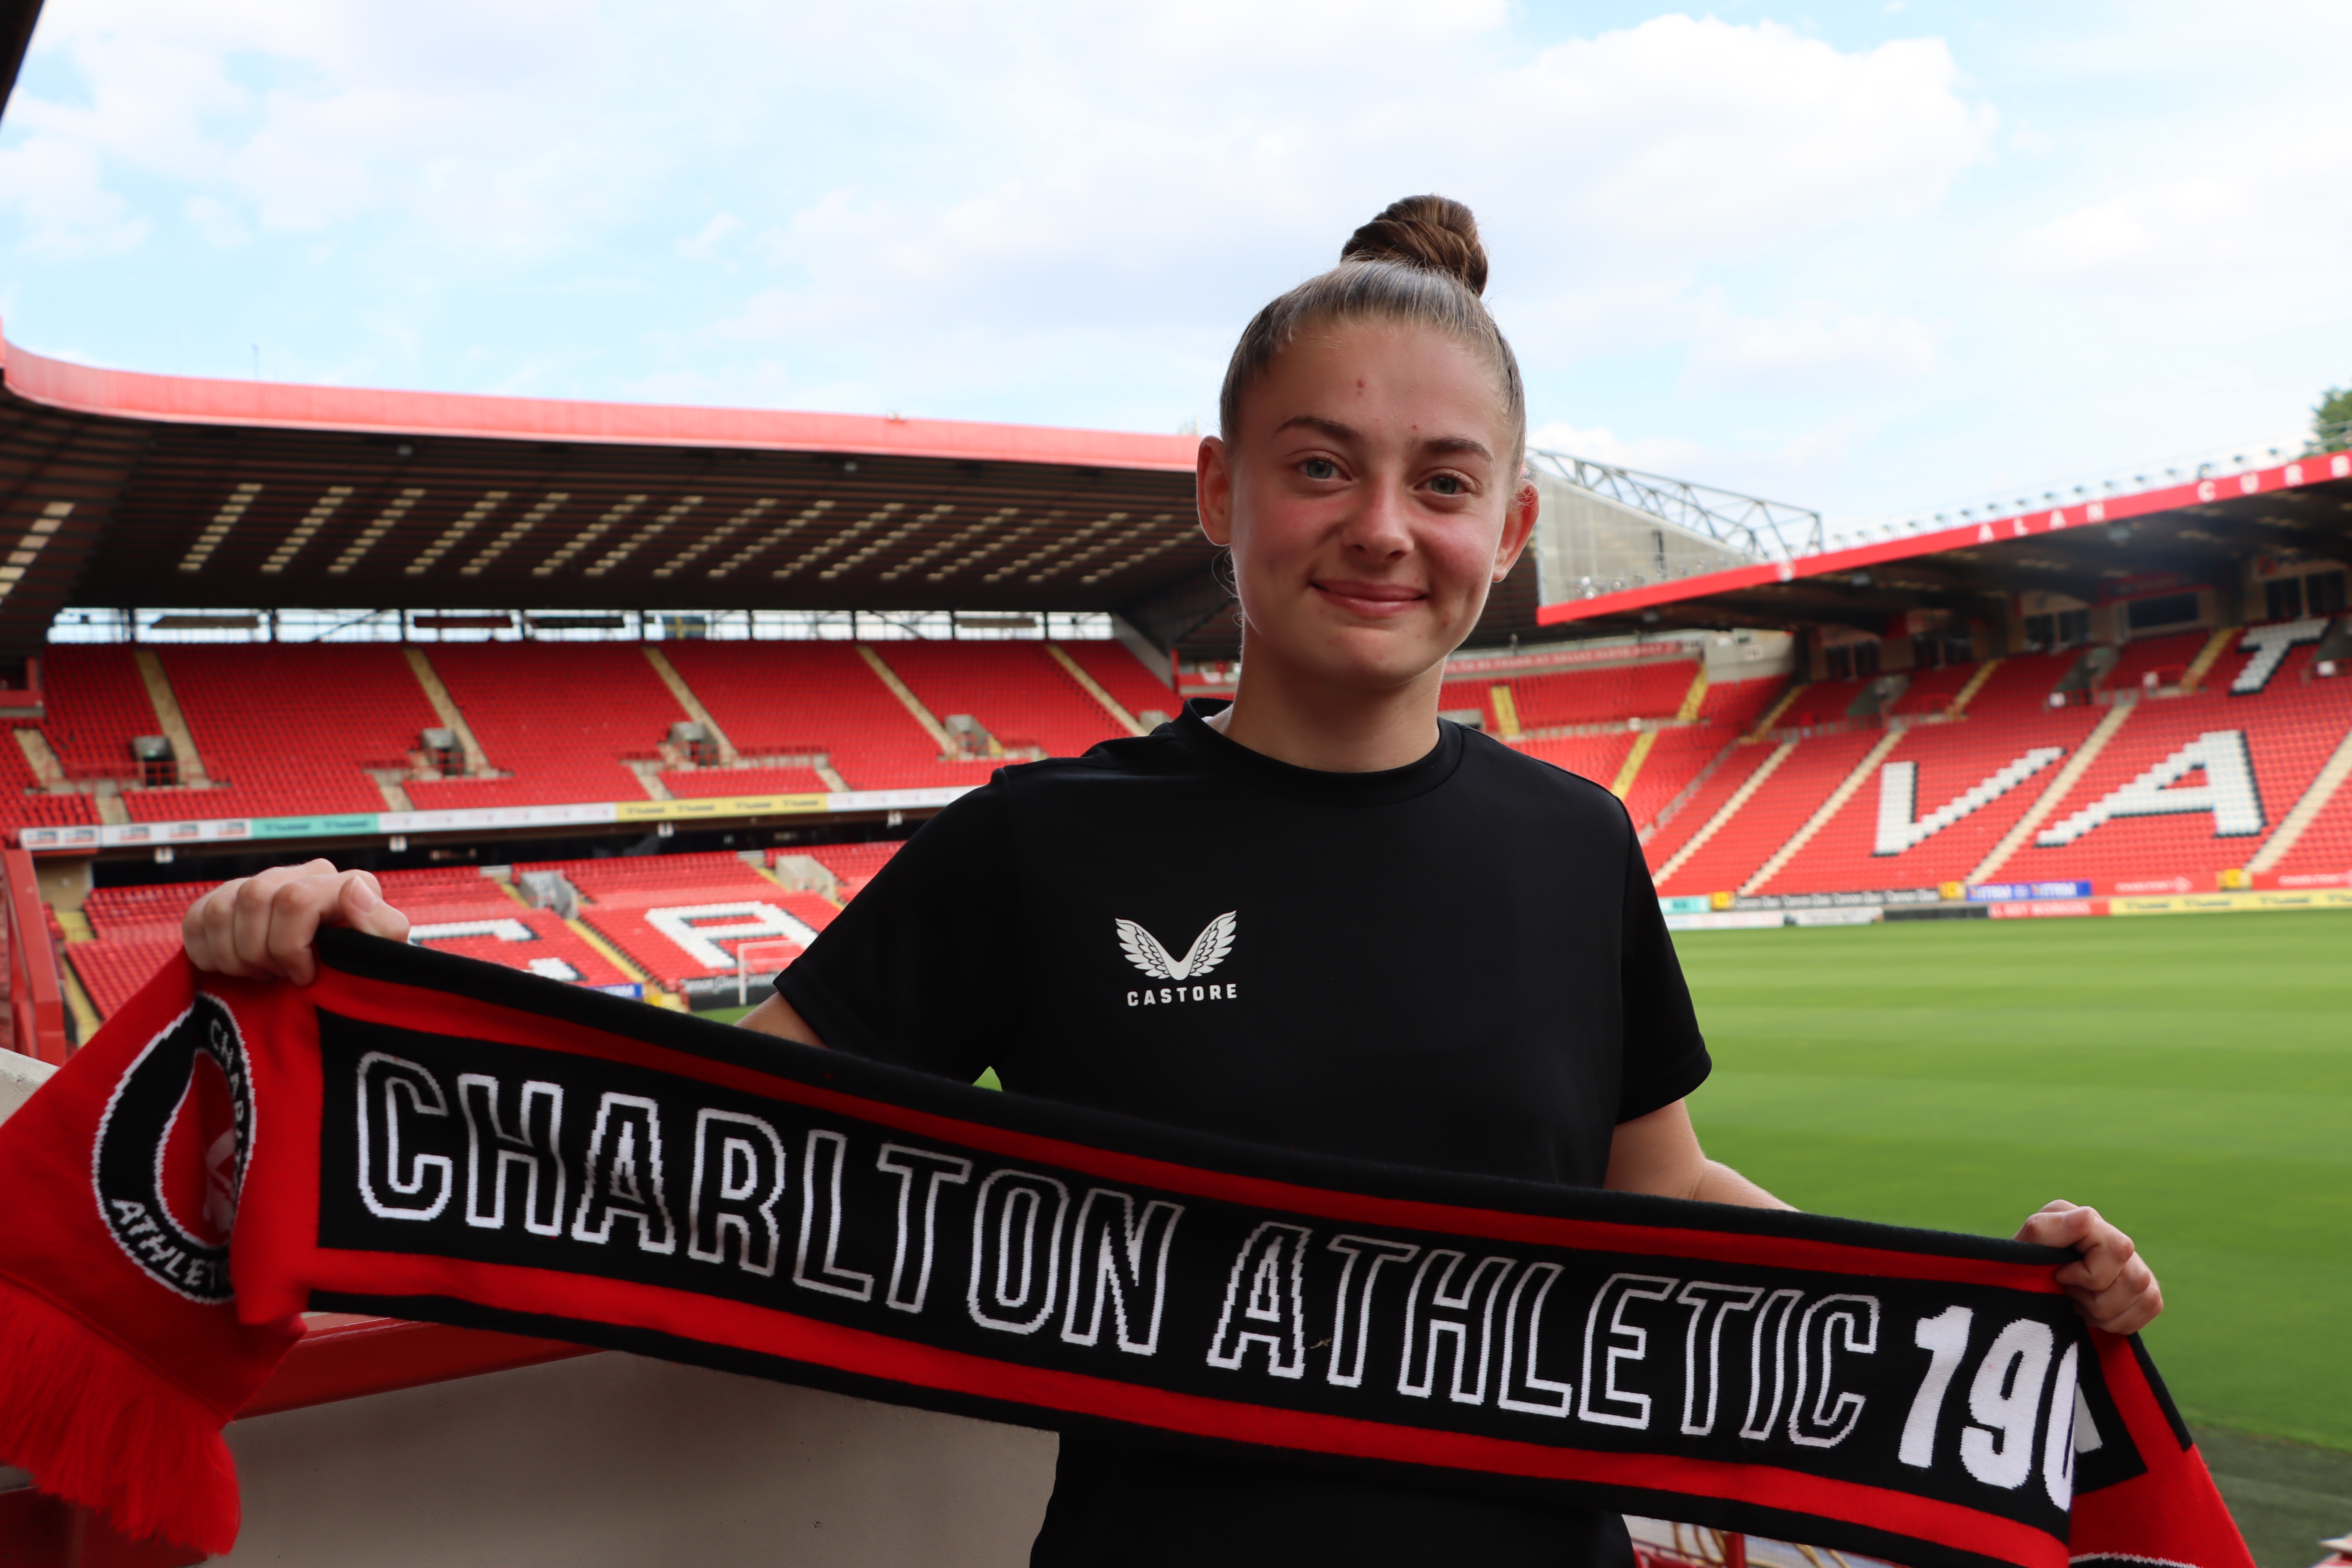 Sophie O'Rourke at The Valley. 